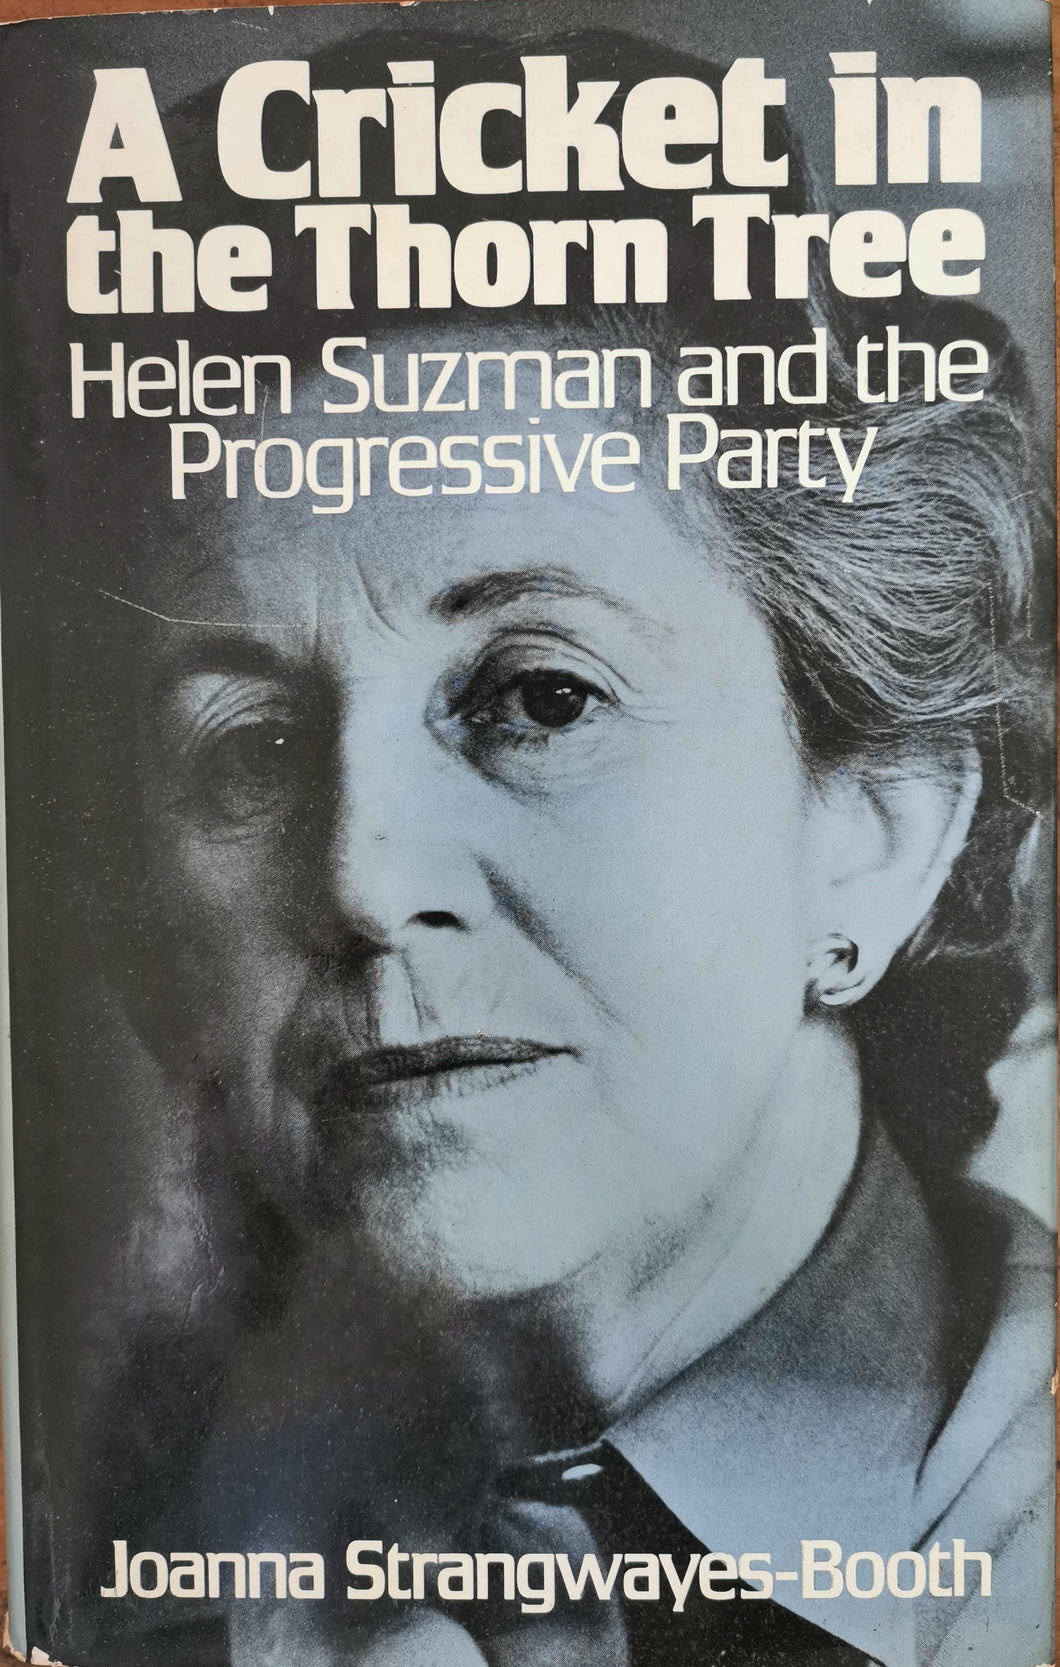 A Cricket in the Thorn Tree: Helen Suzman and the Progressive Party - Joanna Strangewayes-Booth